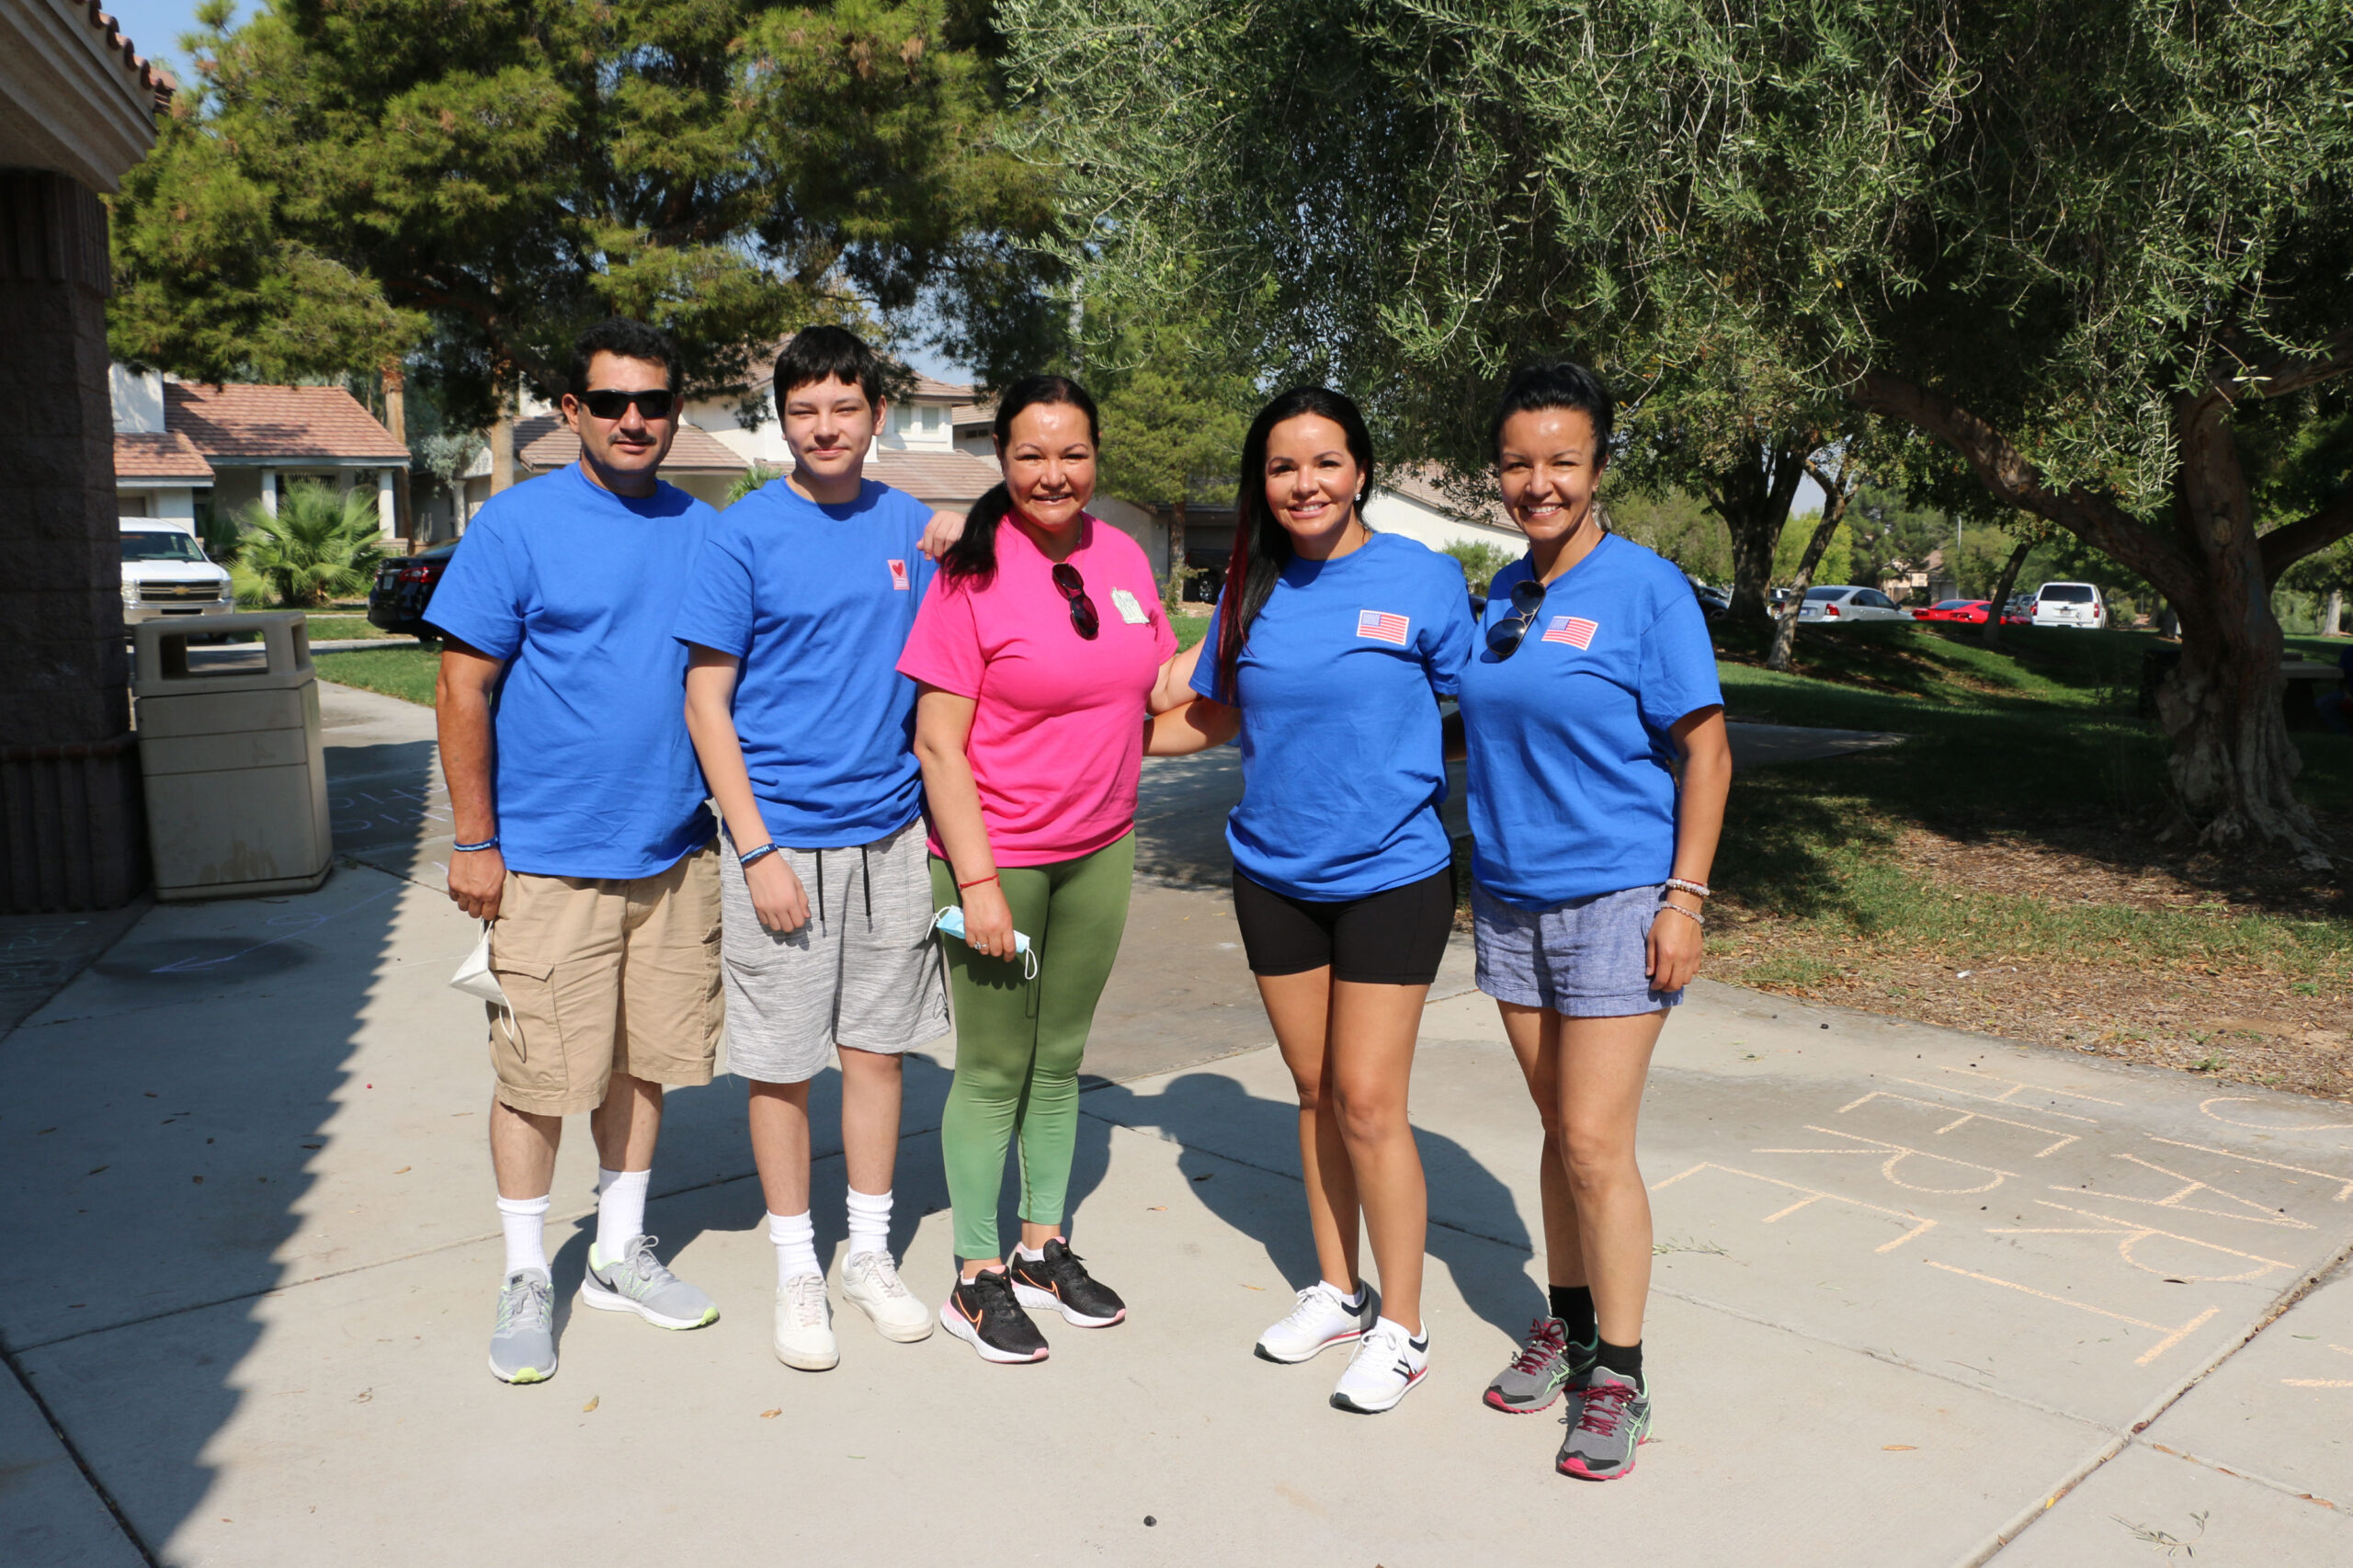 2nd Annual Myositis Empower Walk, In Person and Virtual, September 19, 2020